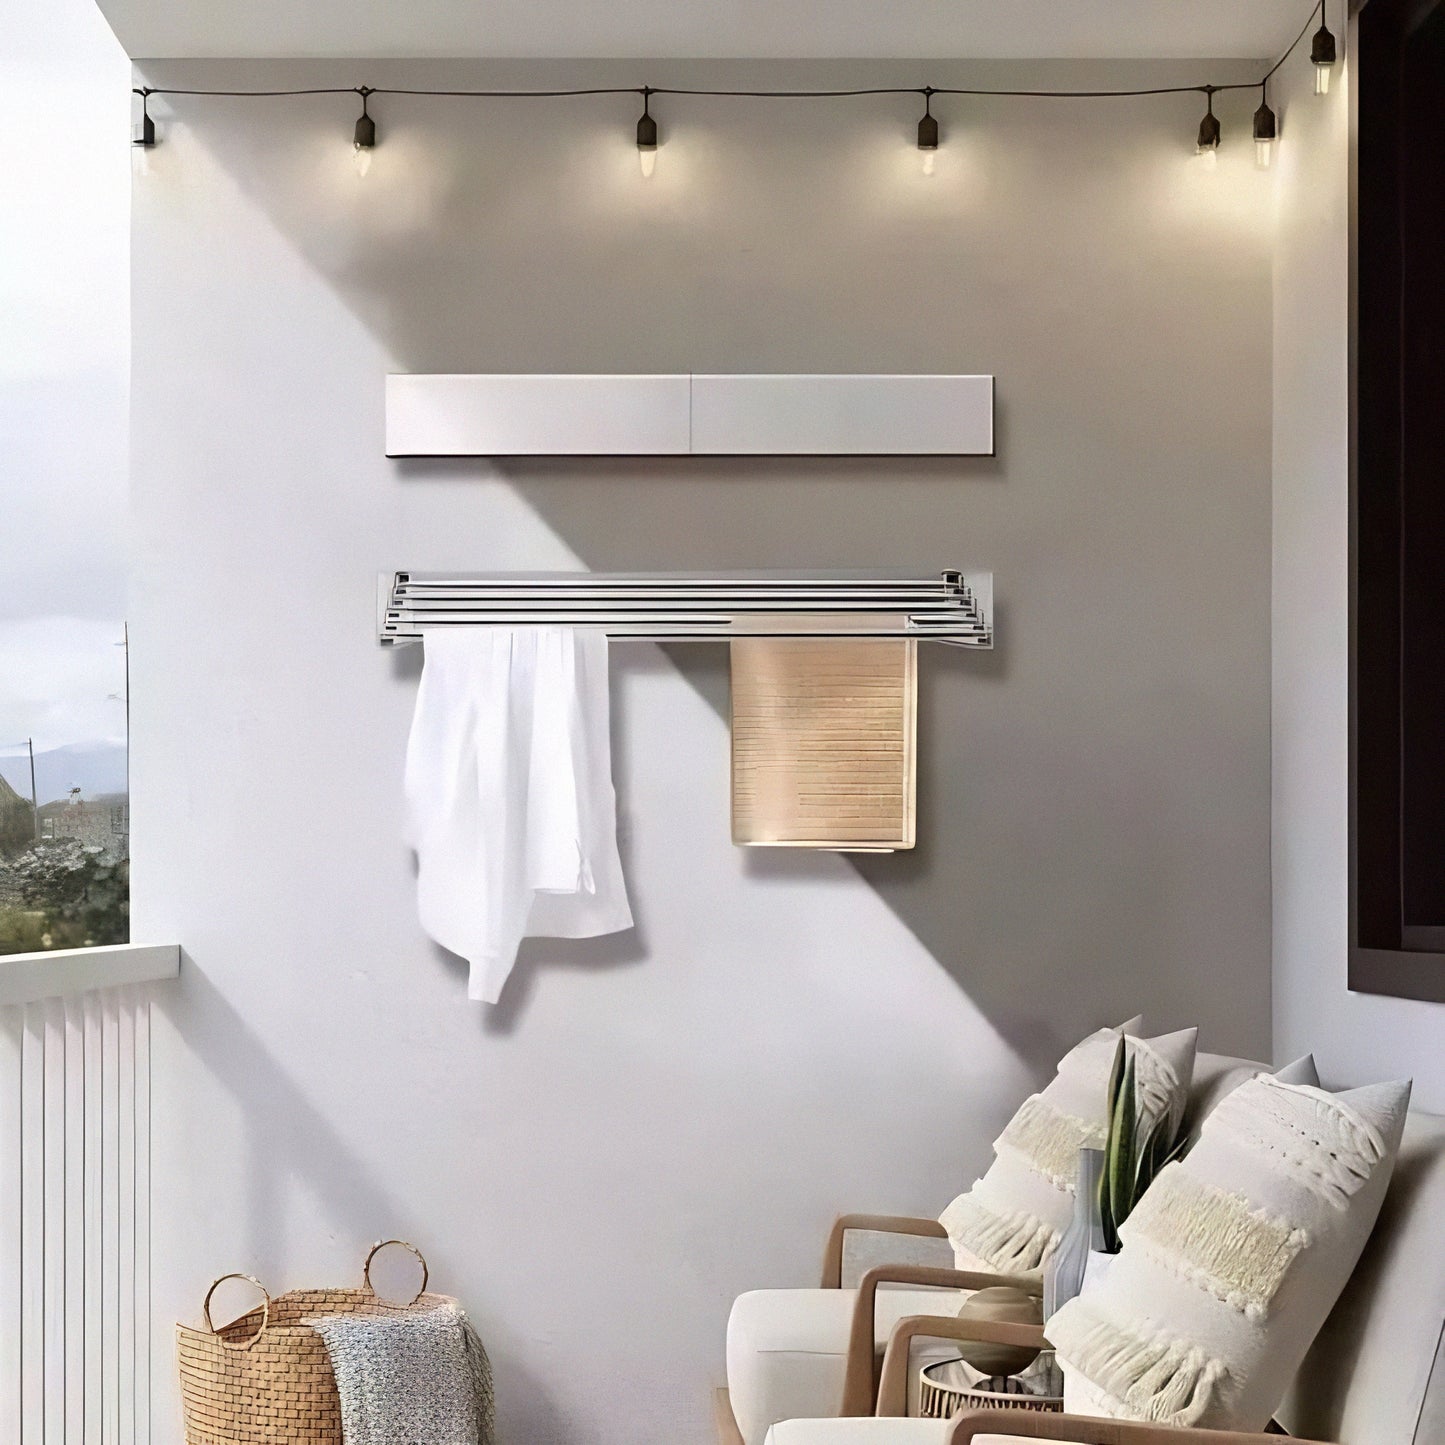 H&G Haven™ -  Wall Mounted Drying Rack